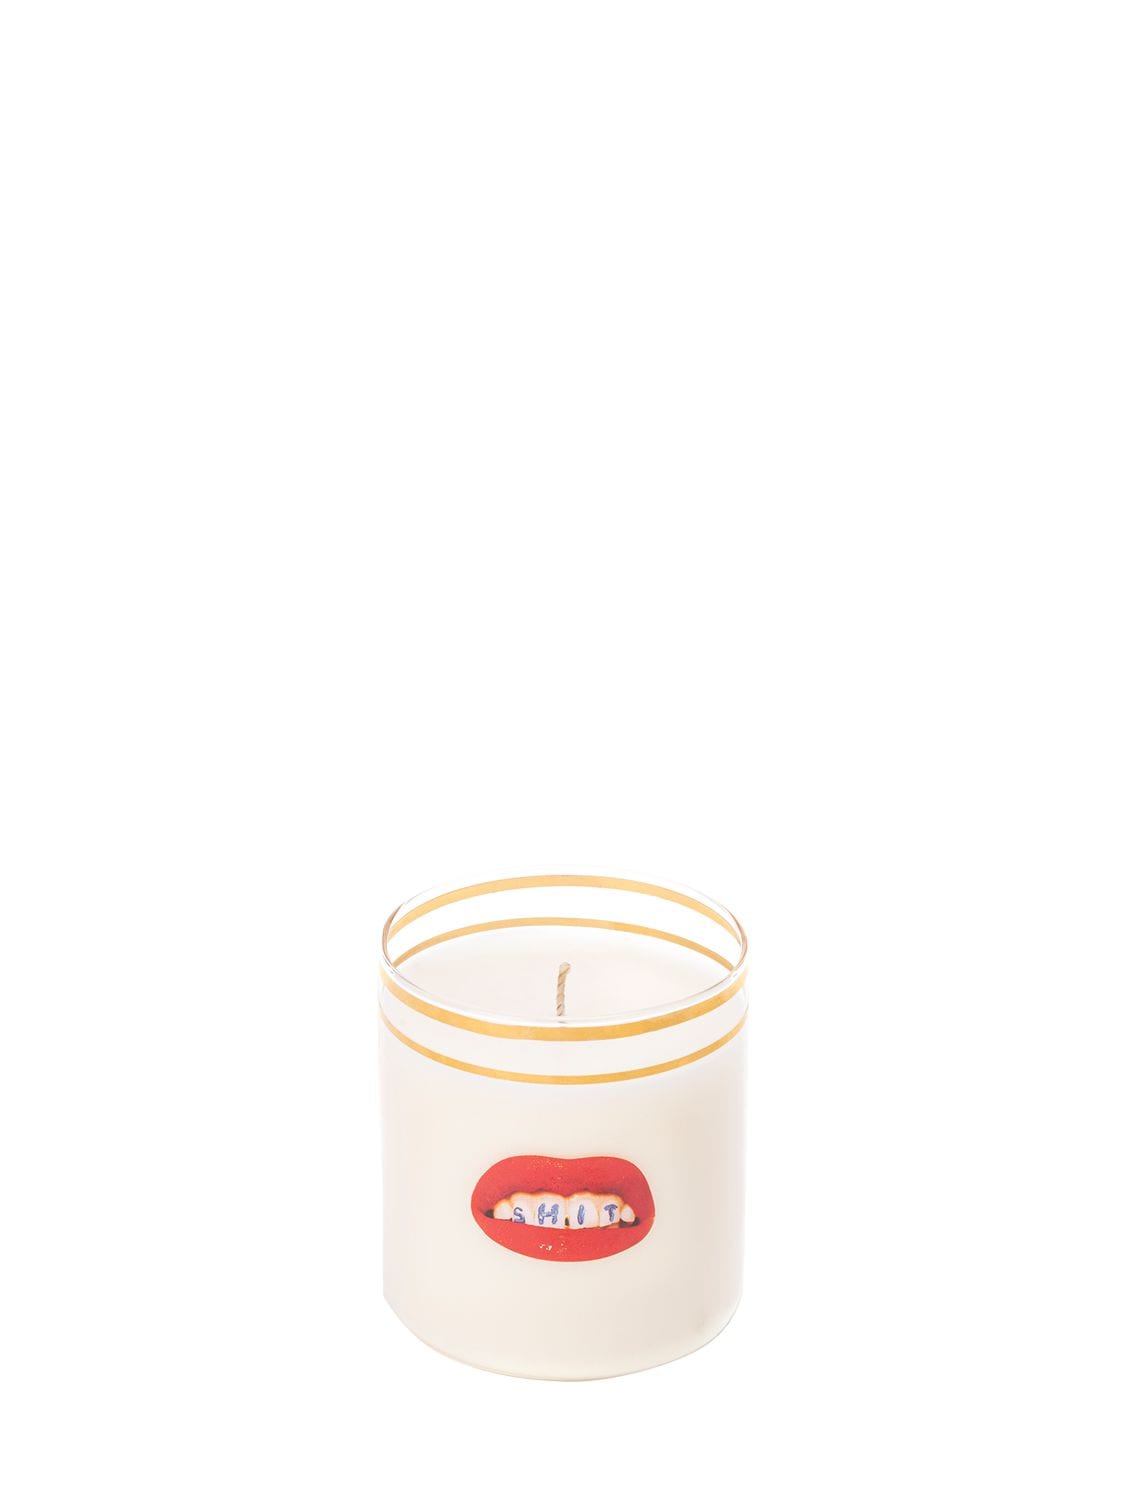 Image of Shit Scented Candle